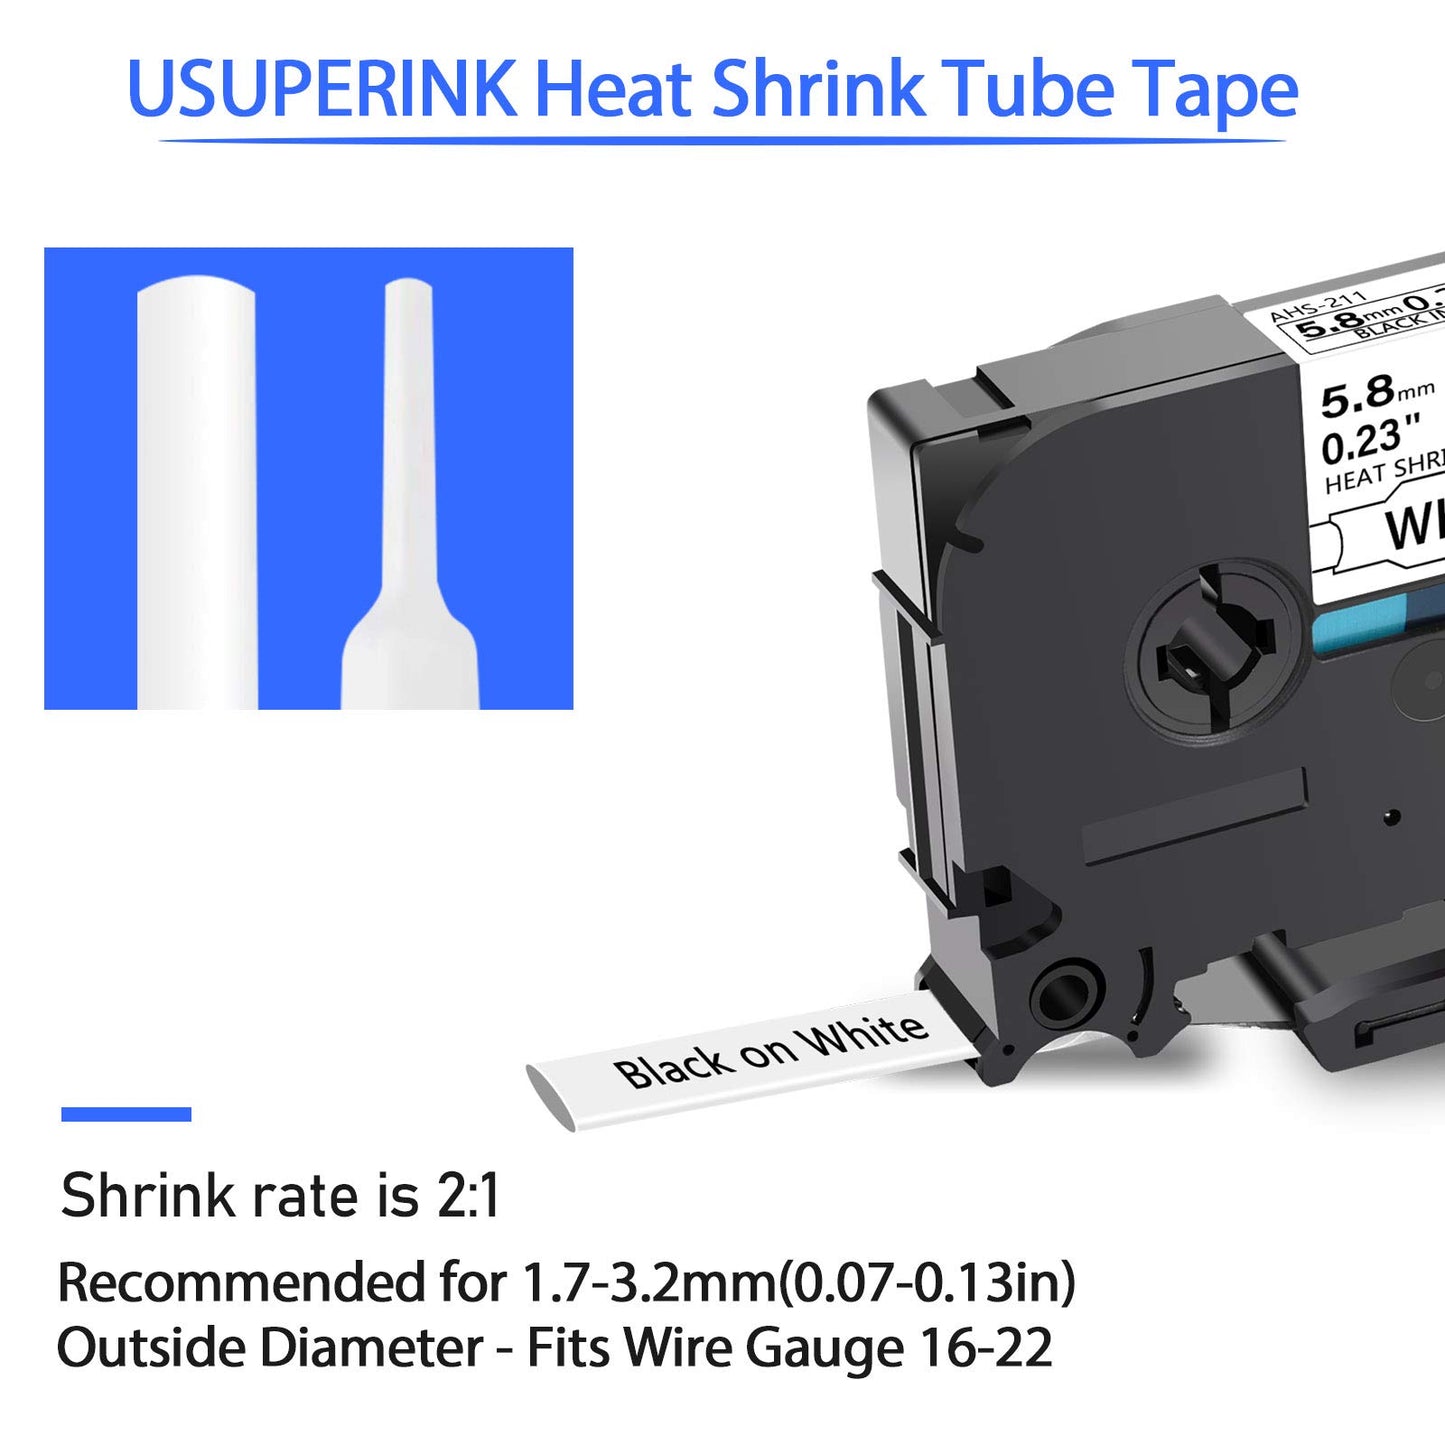 USUPERINK 3 Pack Compatible for Brother HSe-211 HSe211 HS-211 HS211 Black on White Heat Shrink Tube Label Tape use in PT-D400 PT-D450 PT-E300 PT-E500 PT-P750WVP Printer (0.23''x 4.92ft, 5.8mm x 1.5m)